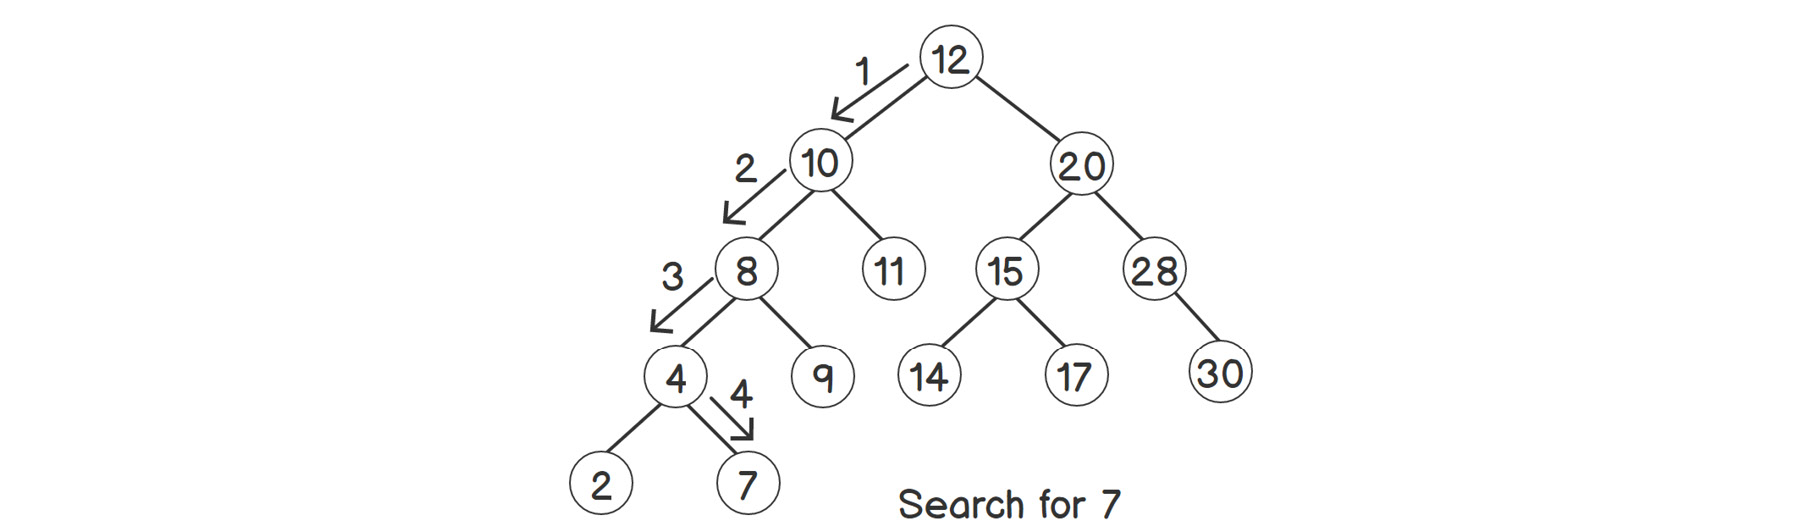 Figure 2.5: Searching for an element in a binary search tree